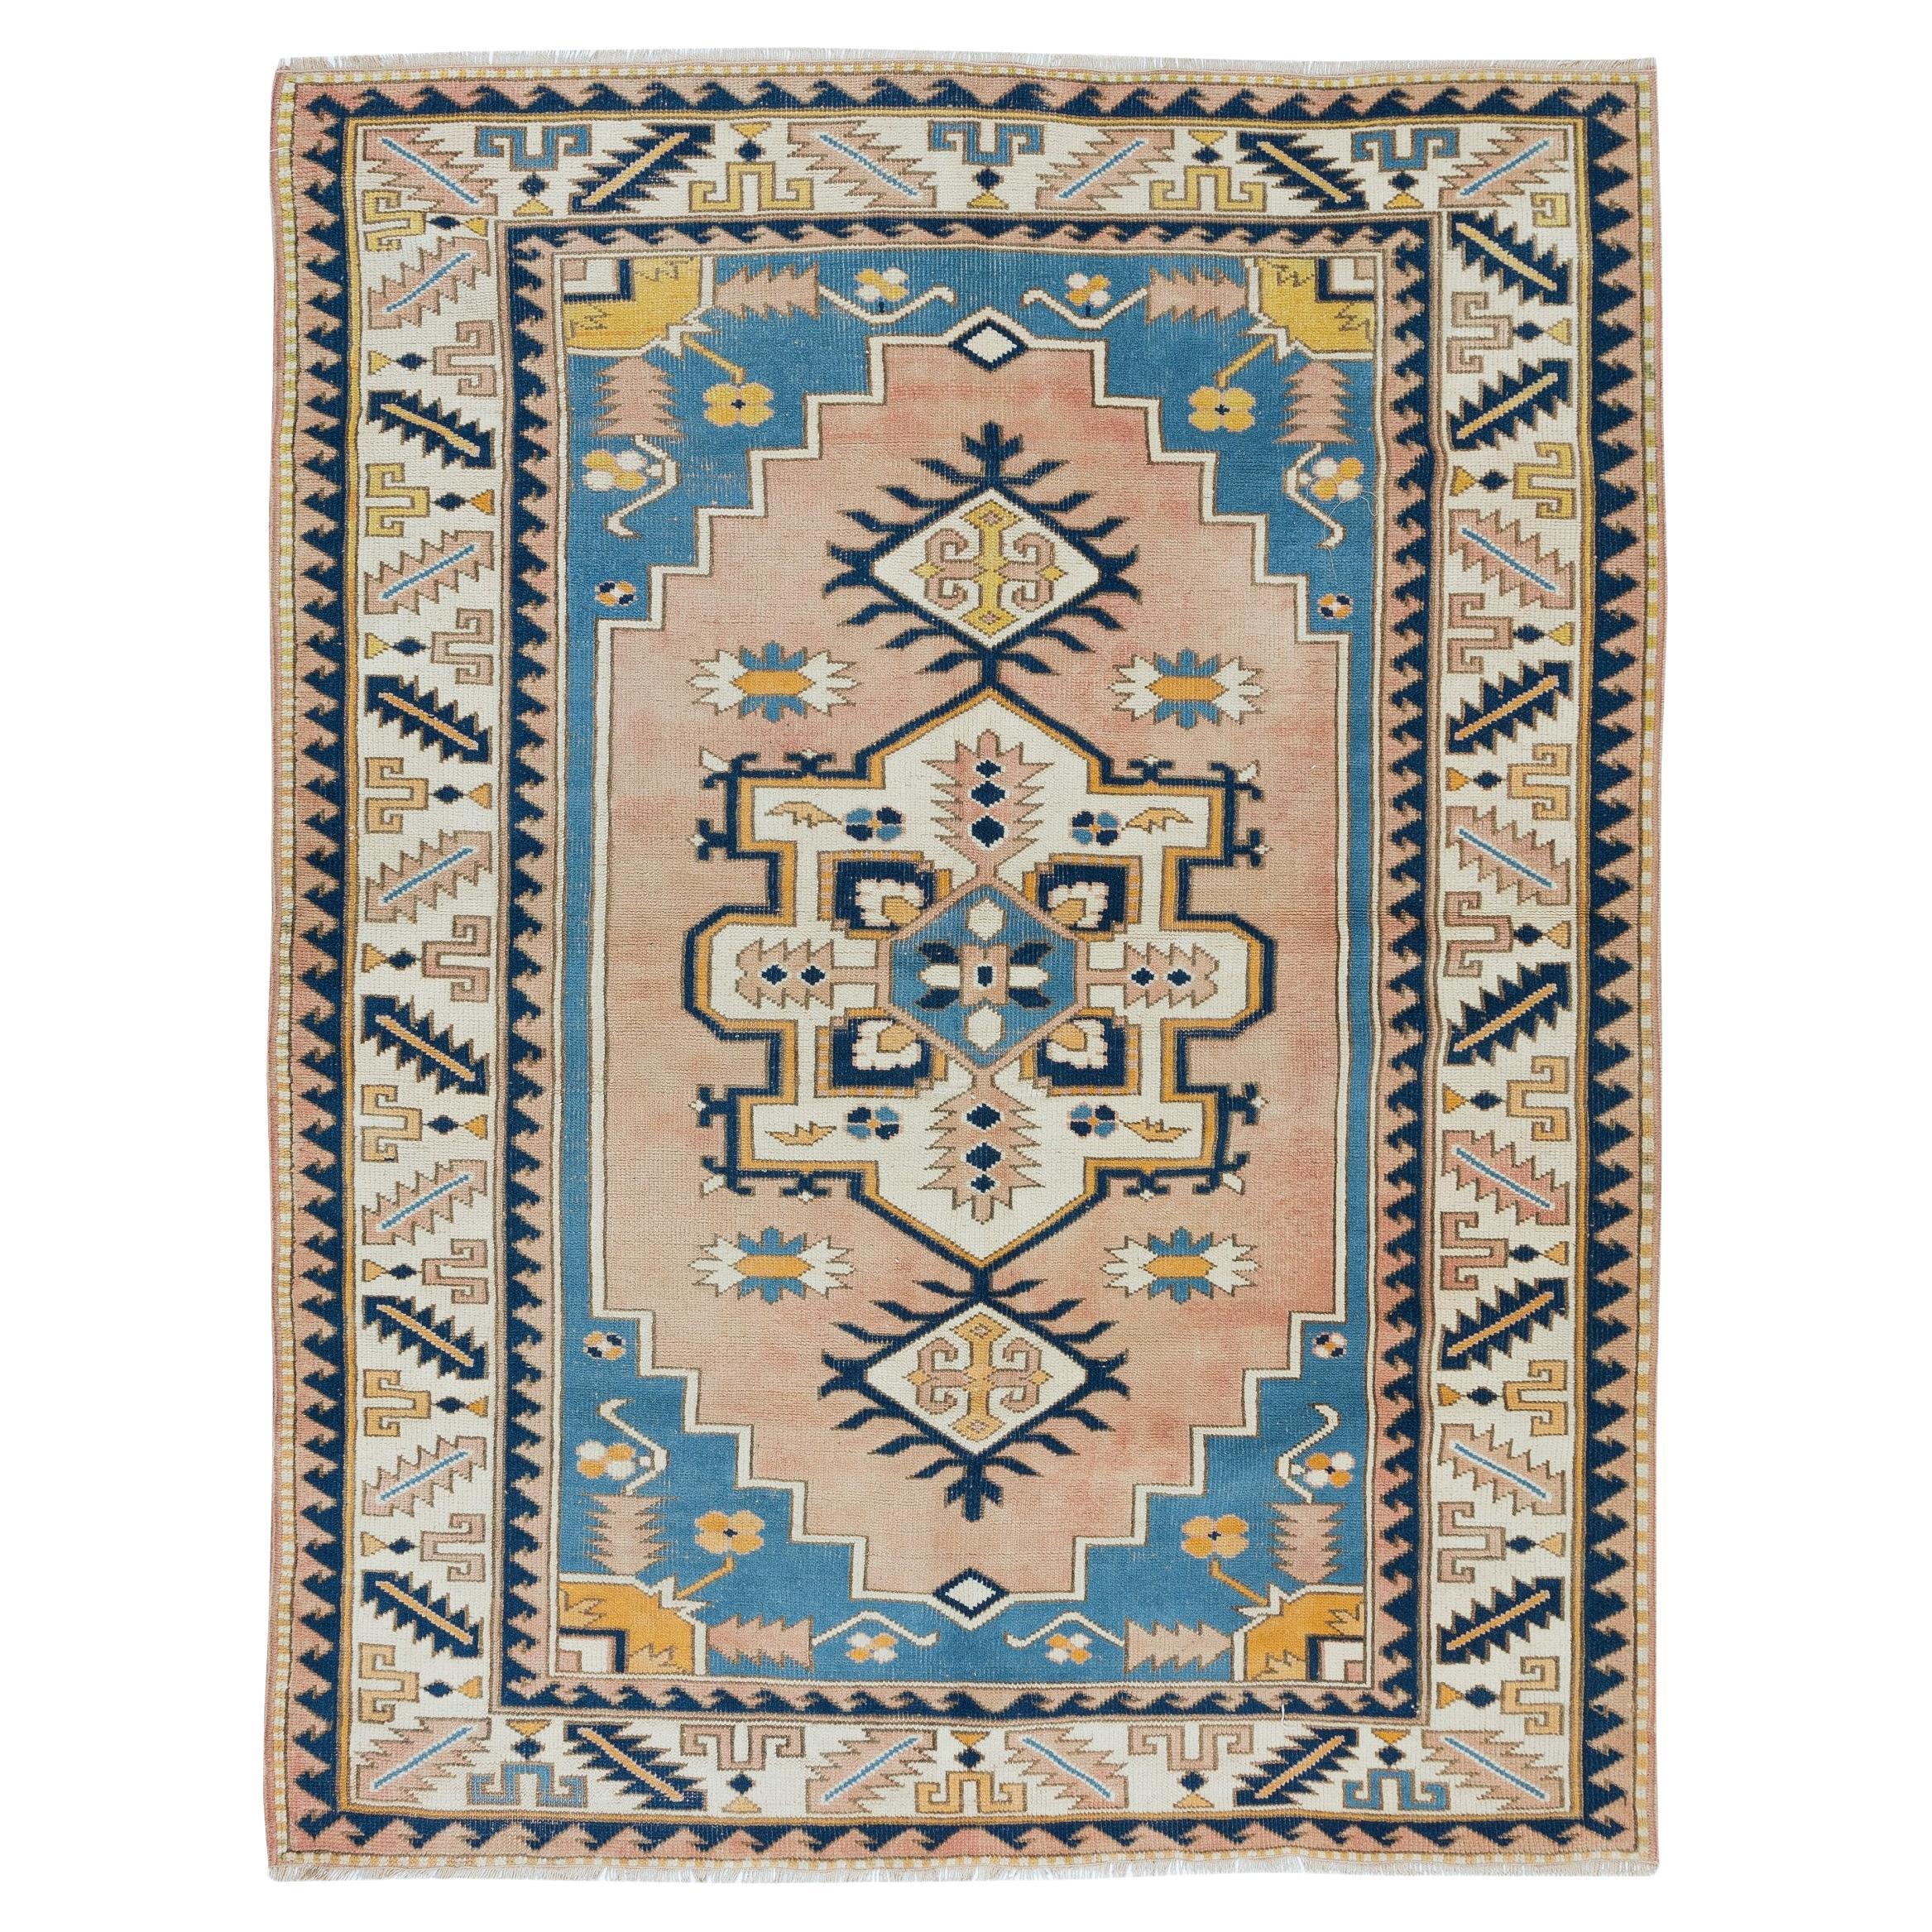 5.5x7.3 Ft Modern Hand Knotted Turkish Geometric Patterned Area Rug, 100% Wool